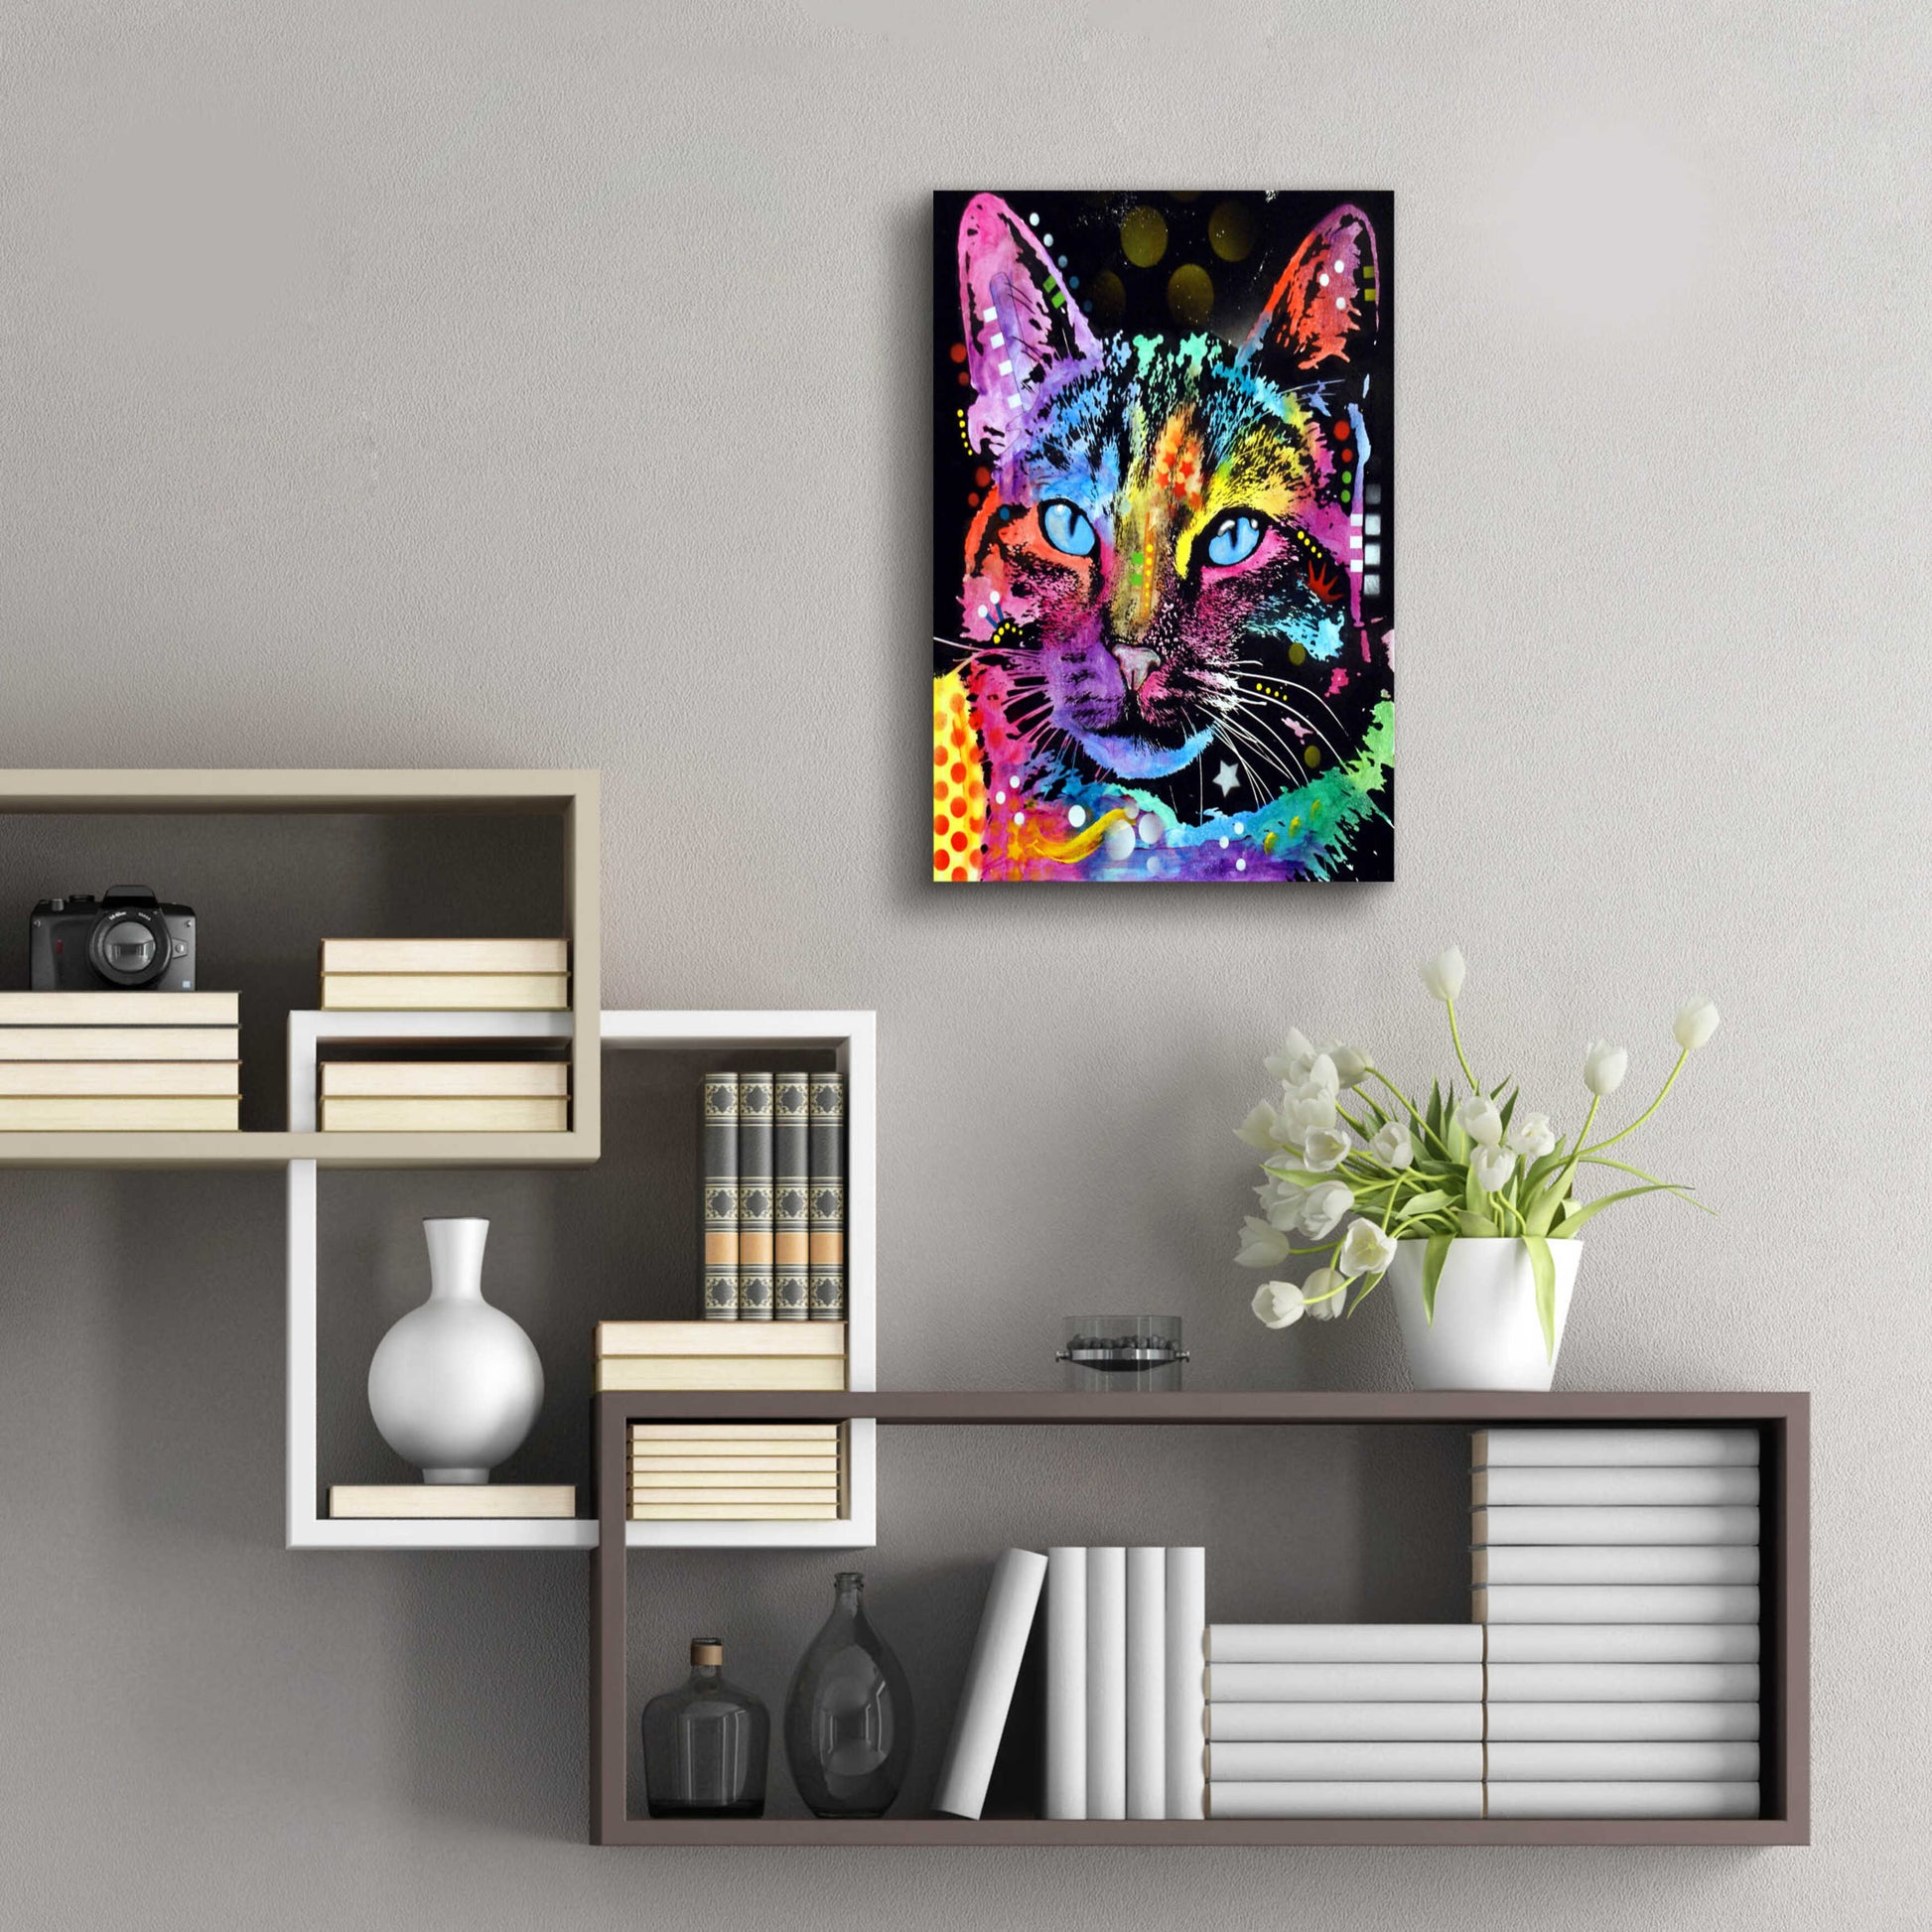 Epic Art 'Thoughtful Cat' by Dean Russo, Acrylic Glass Wall Art,16x24